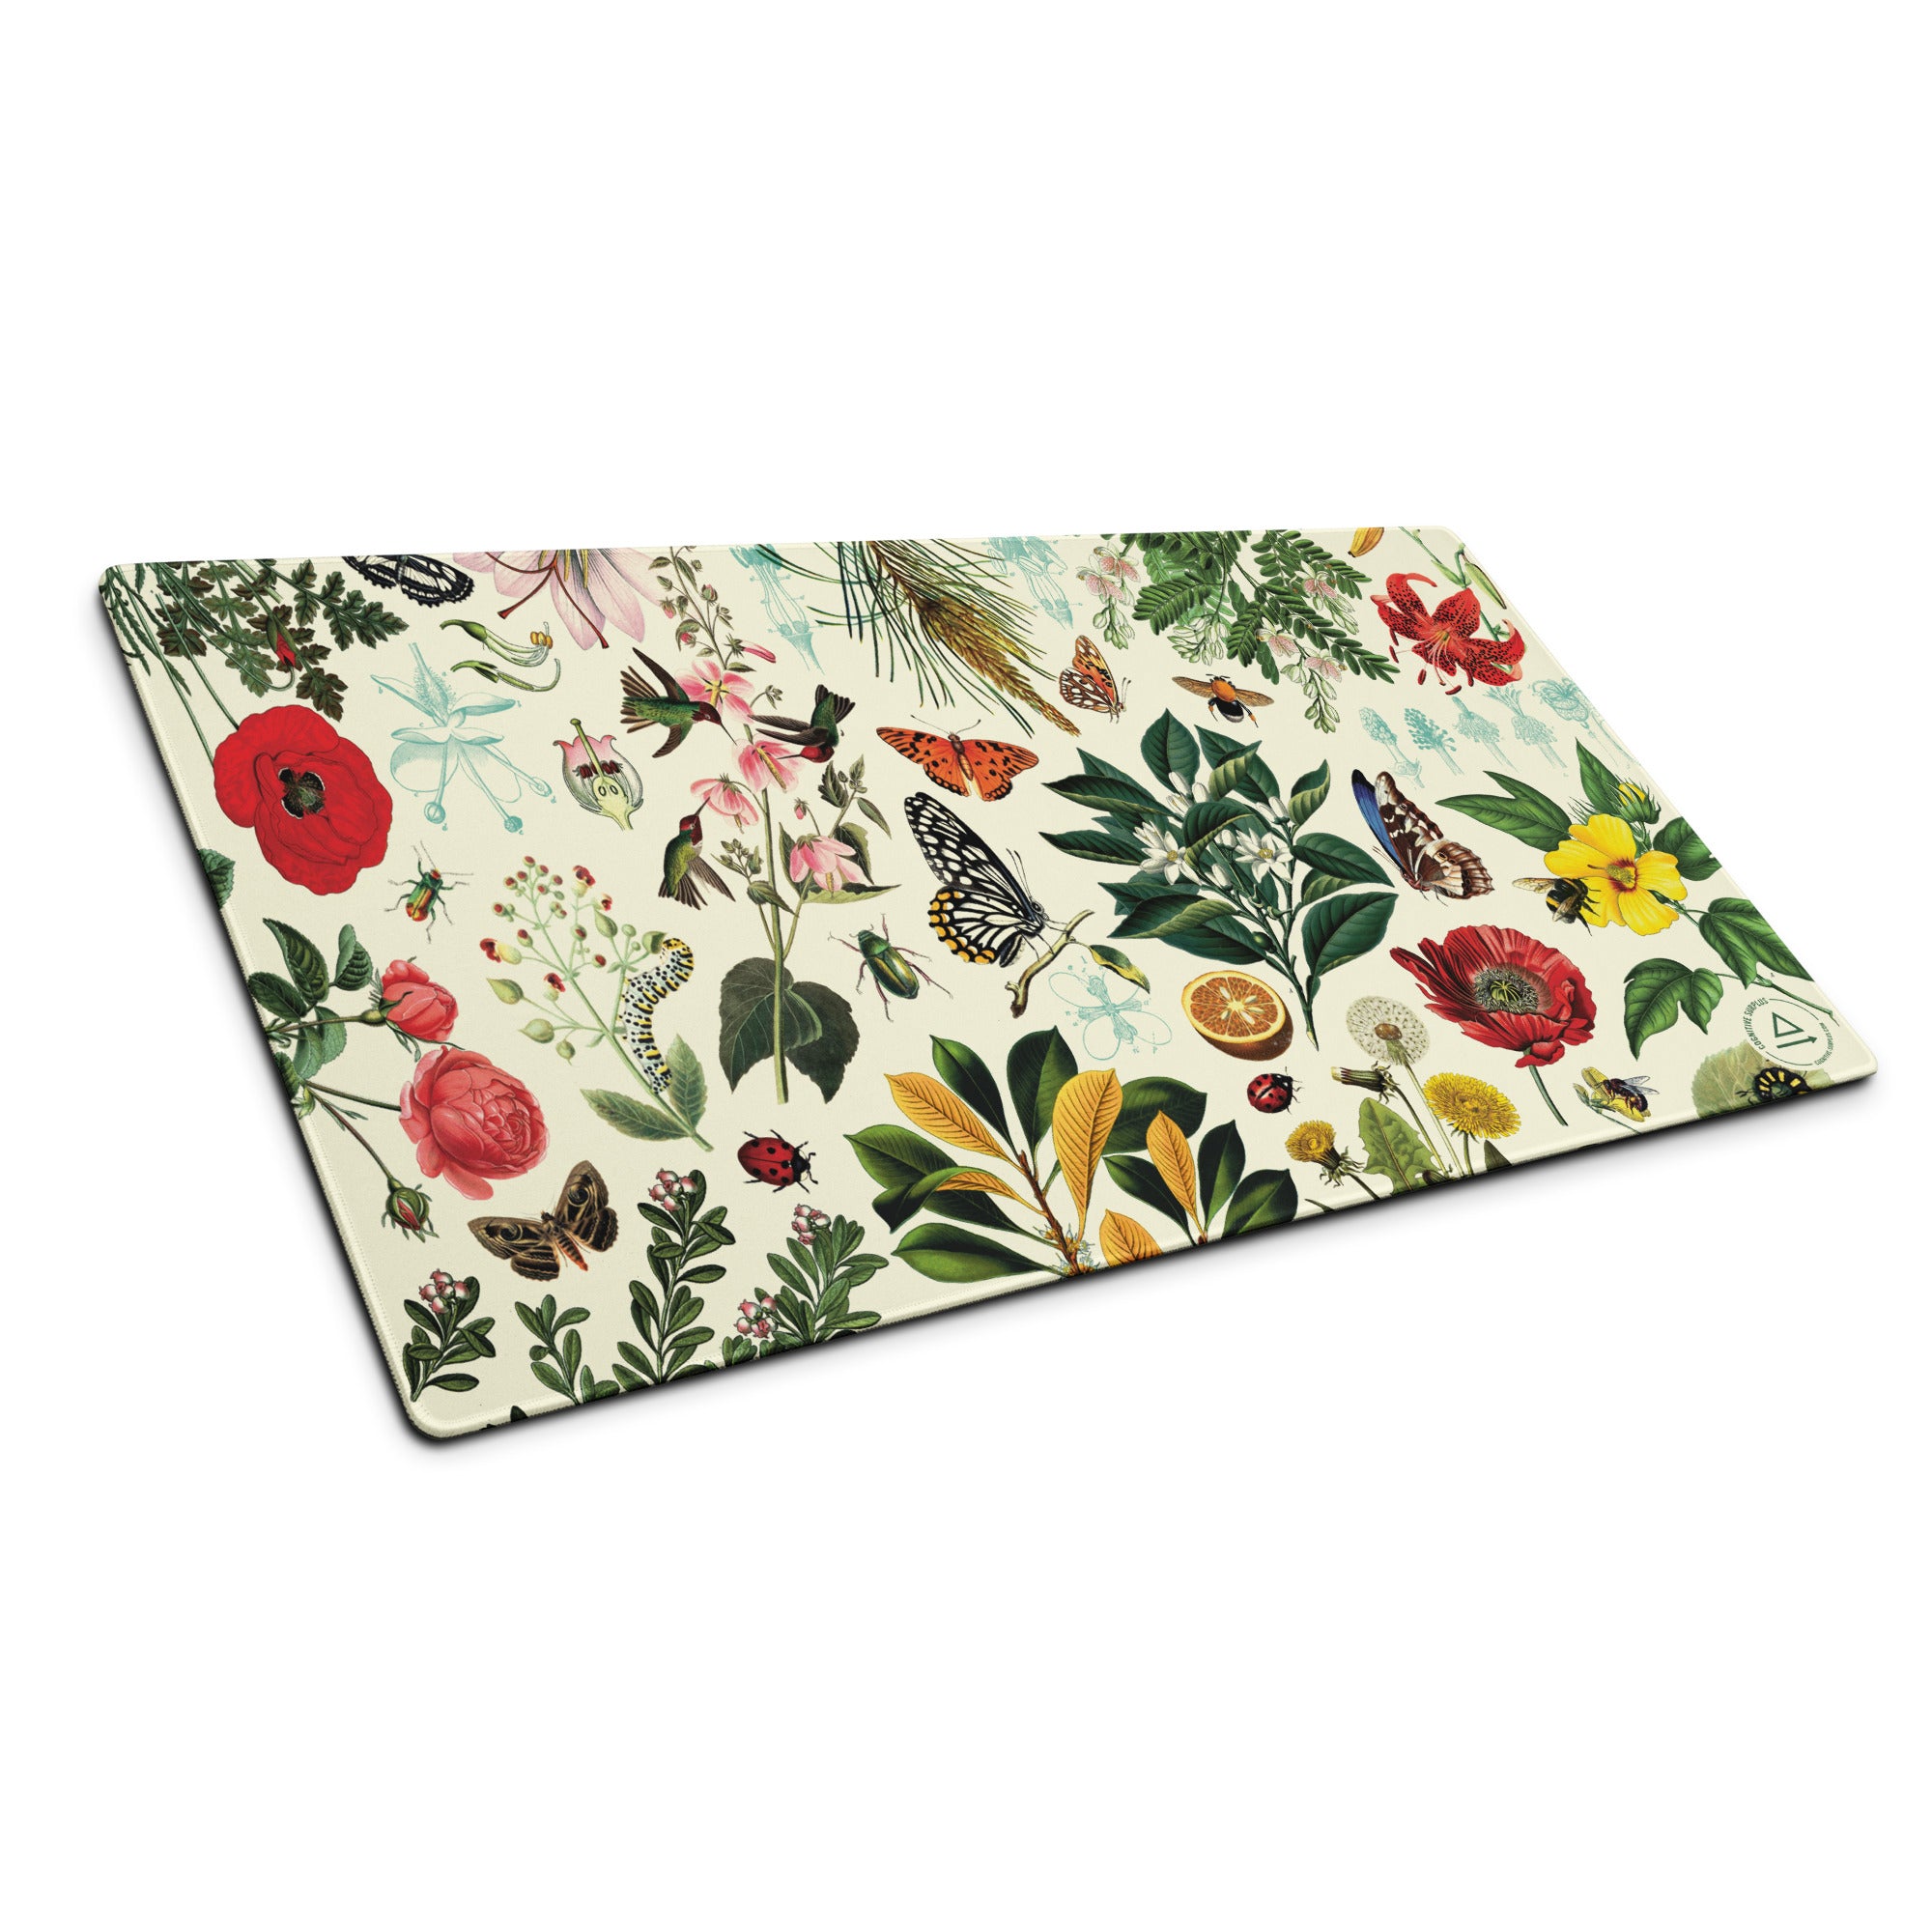 gaming-mouse-pad-white-36x18-front-657265f2df39c.jpg